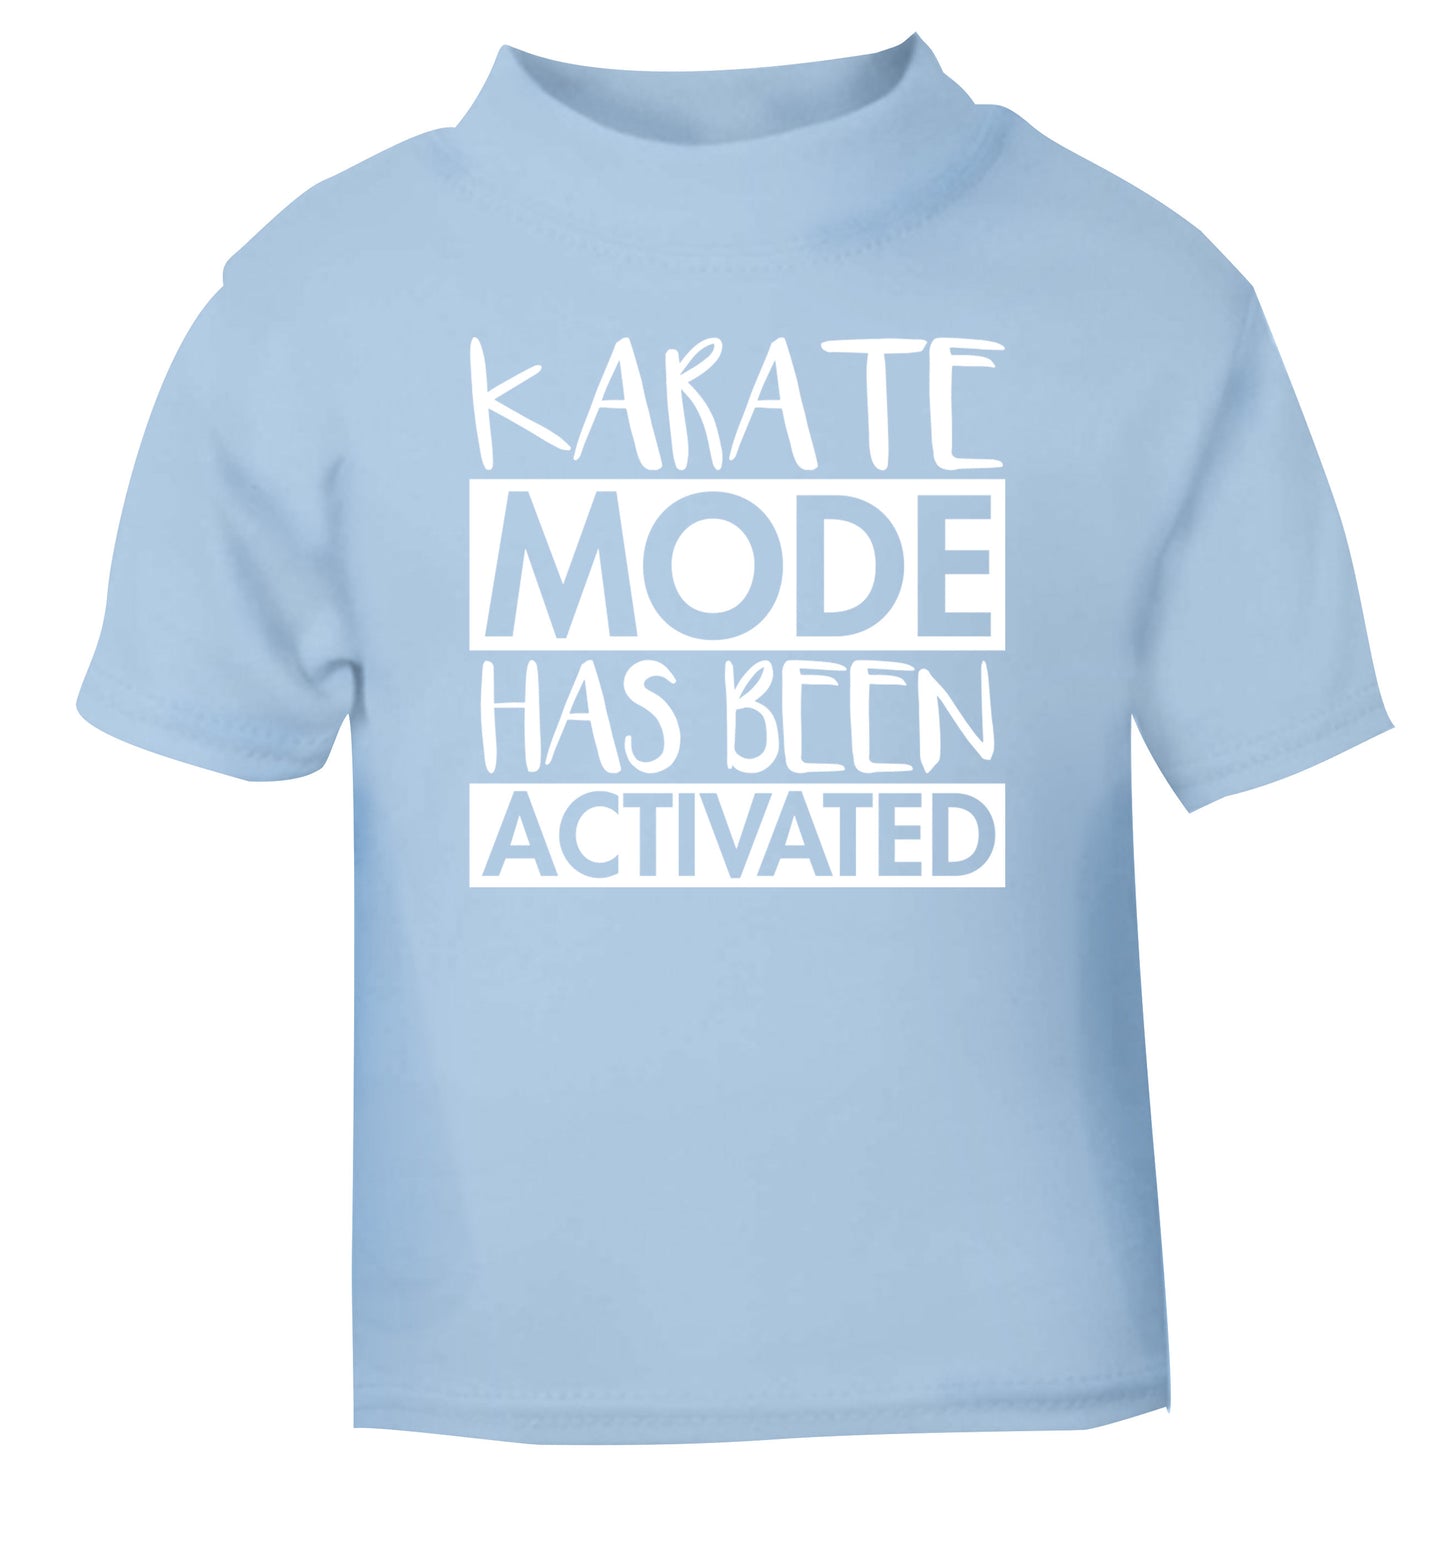 Karate mode activated light blue Baby Toddler Tshirt 2 Years